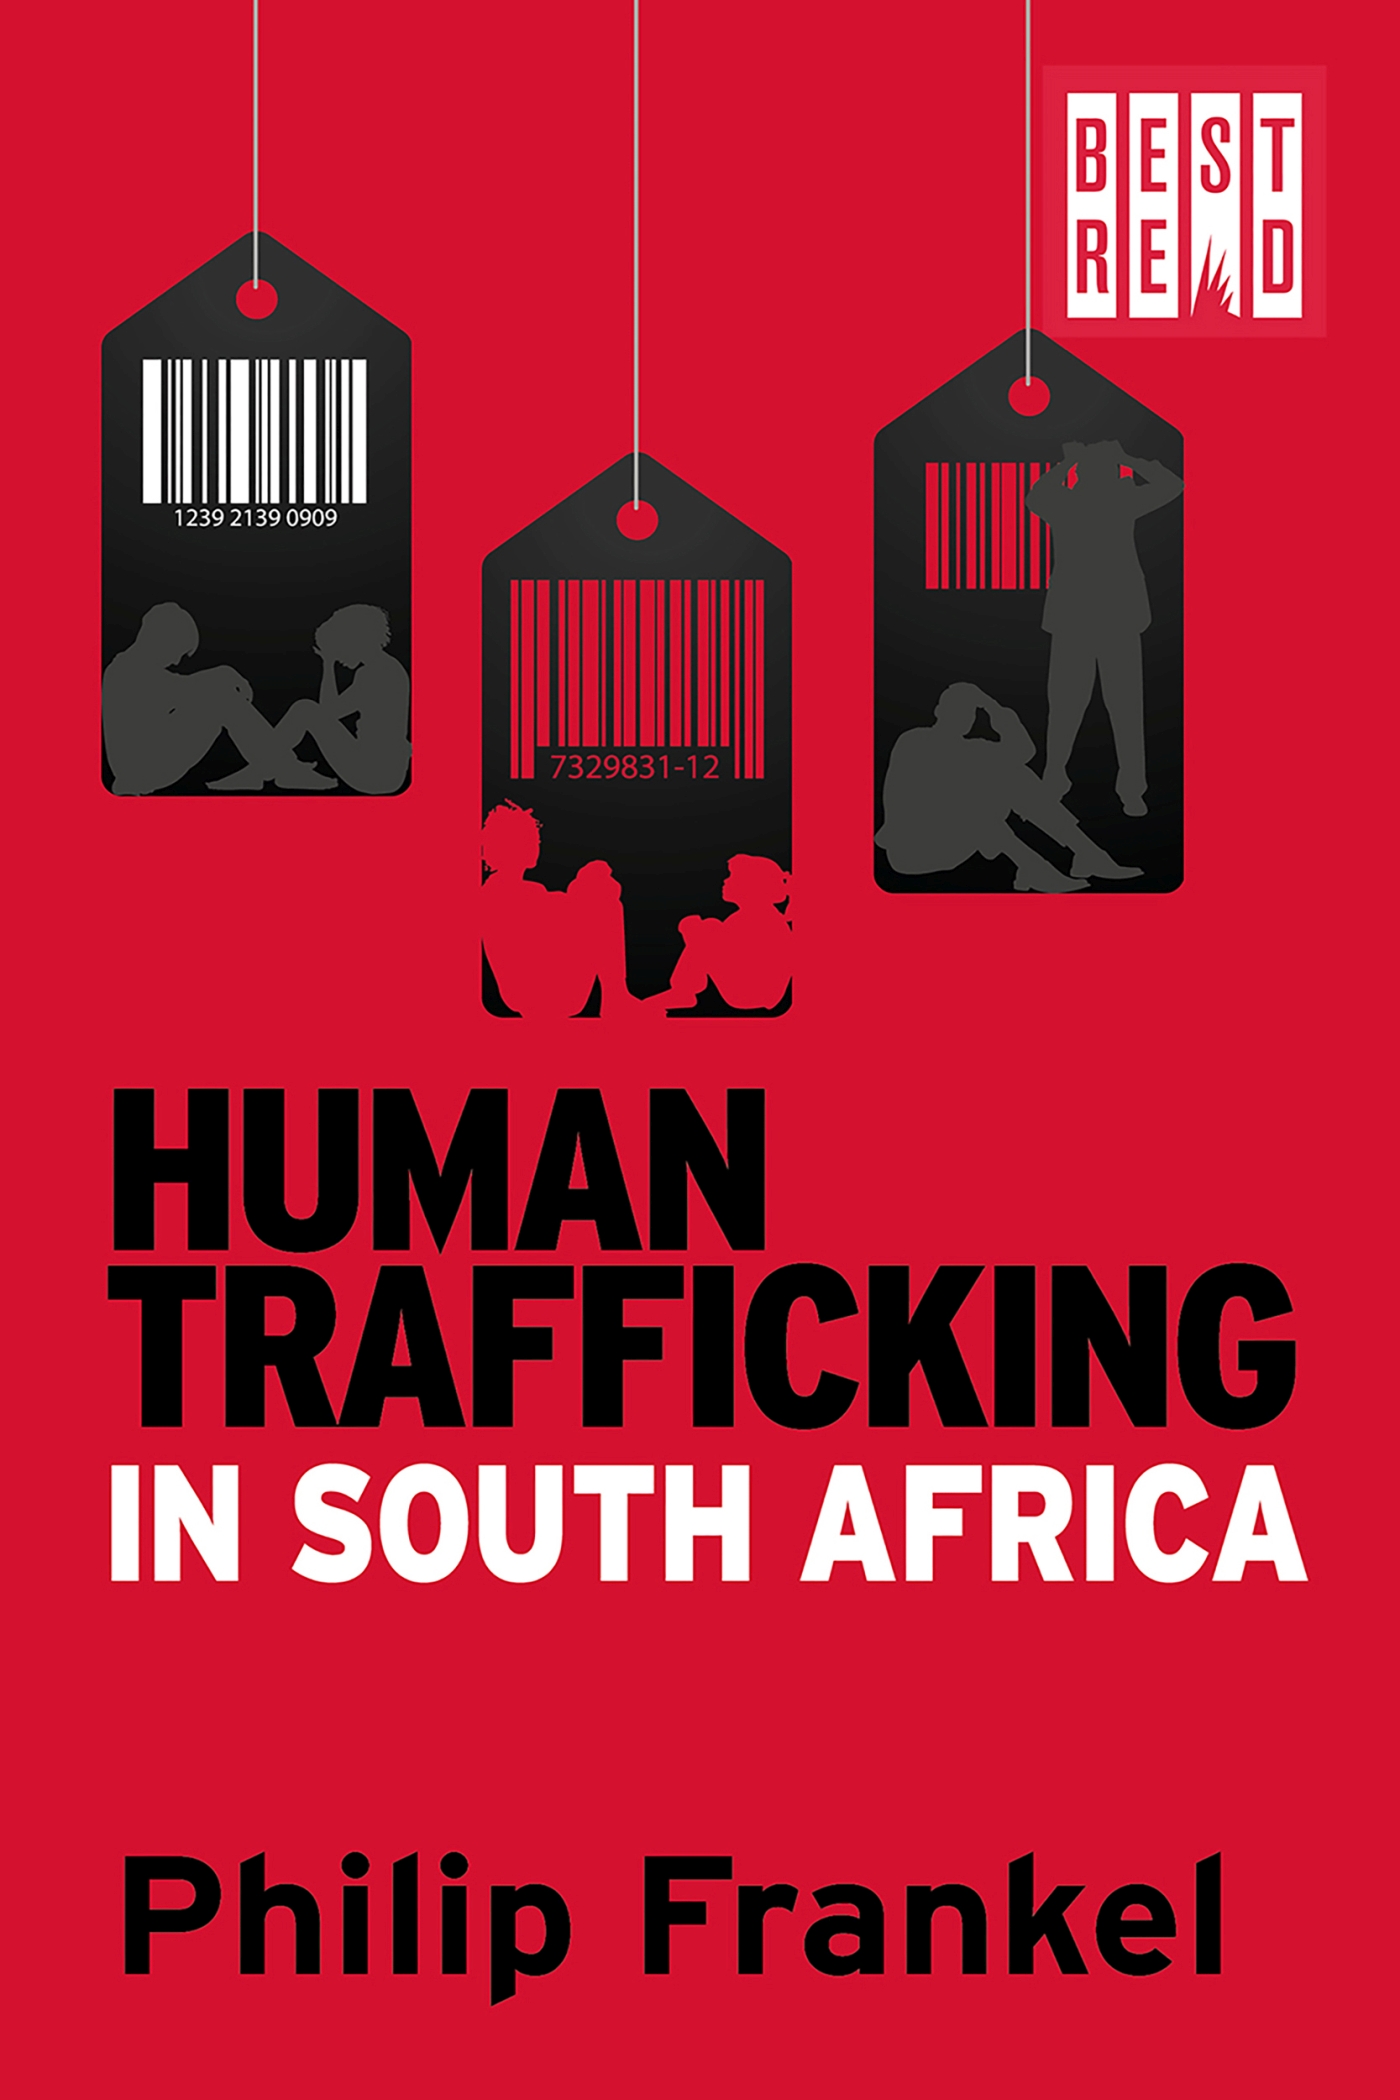 World Day Against Trafficking In Persons Prof Philip Frankel Speaks To Enca Hsrc 0551